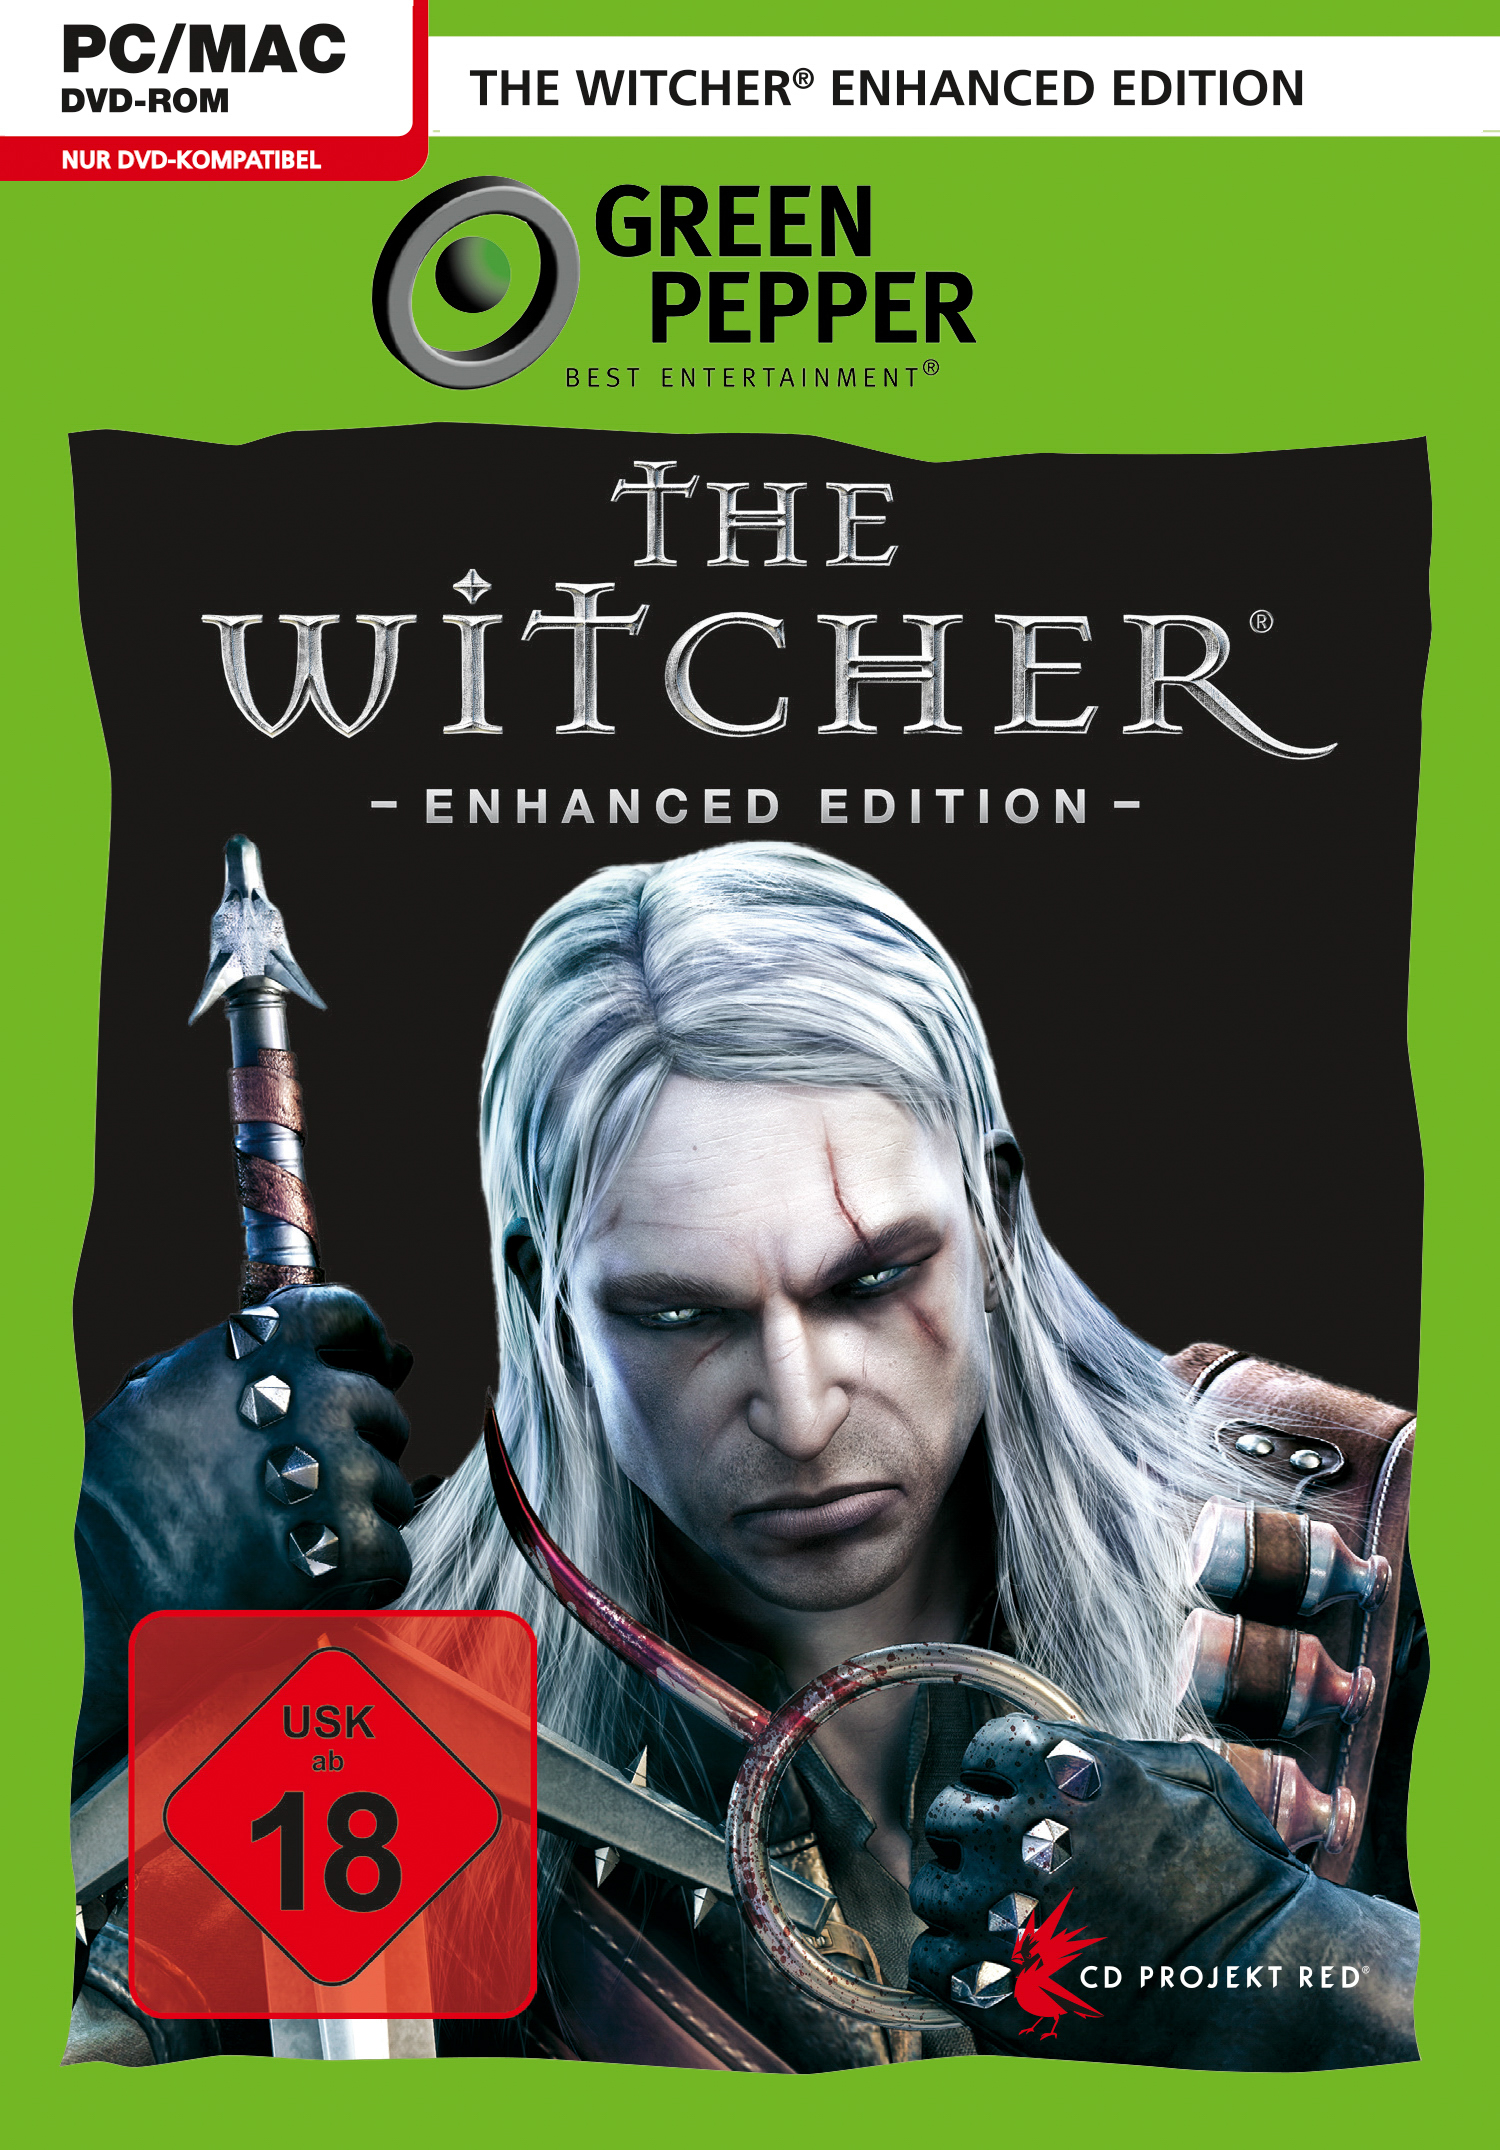 The Witcher - Enhanced Edtion